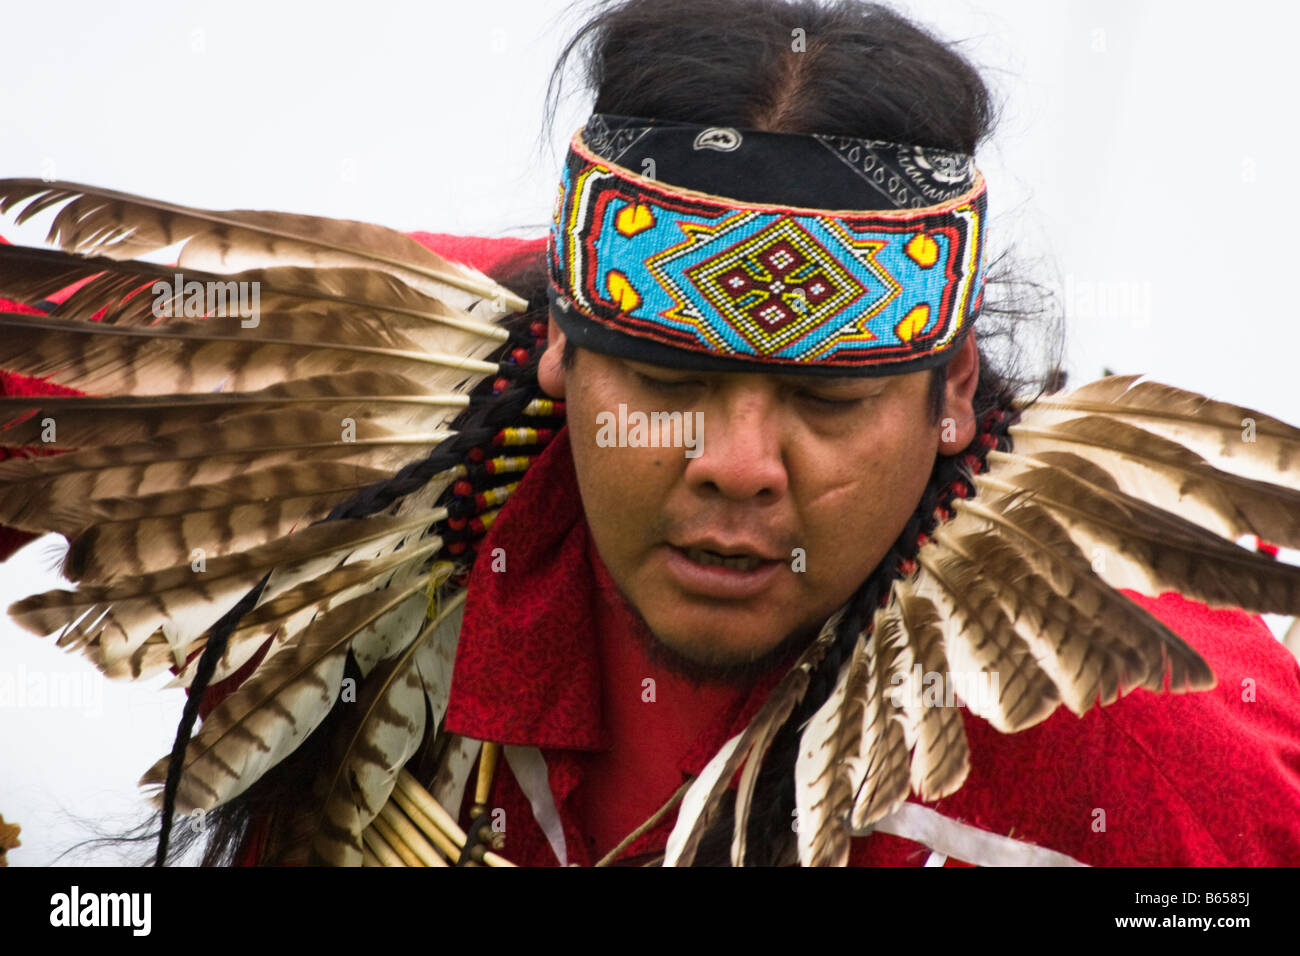 A Native American man dances at the Healing Horse Spirit PowWow in Mt. Airy, Maryland. Stock Photo